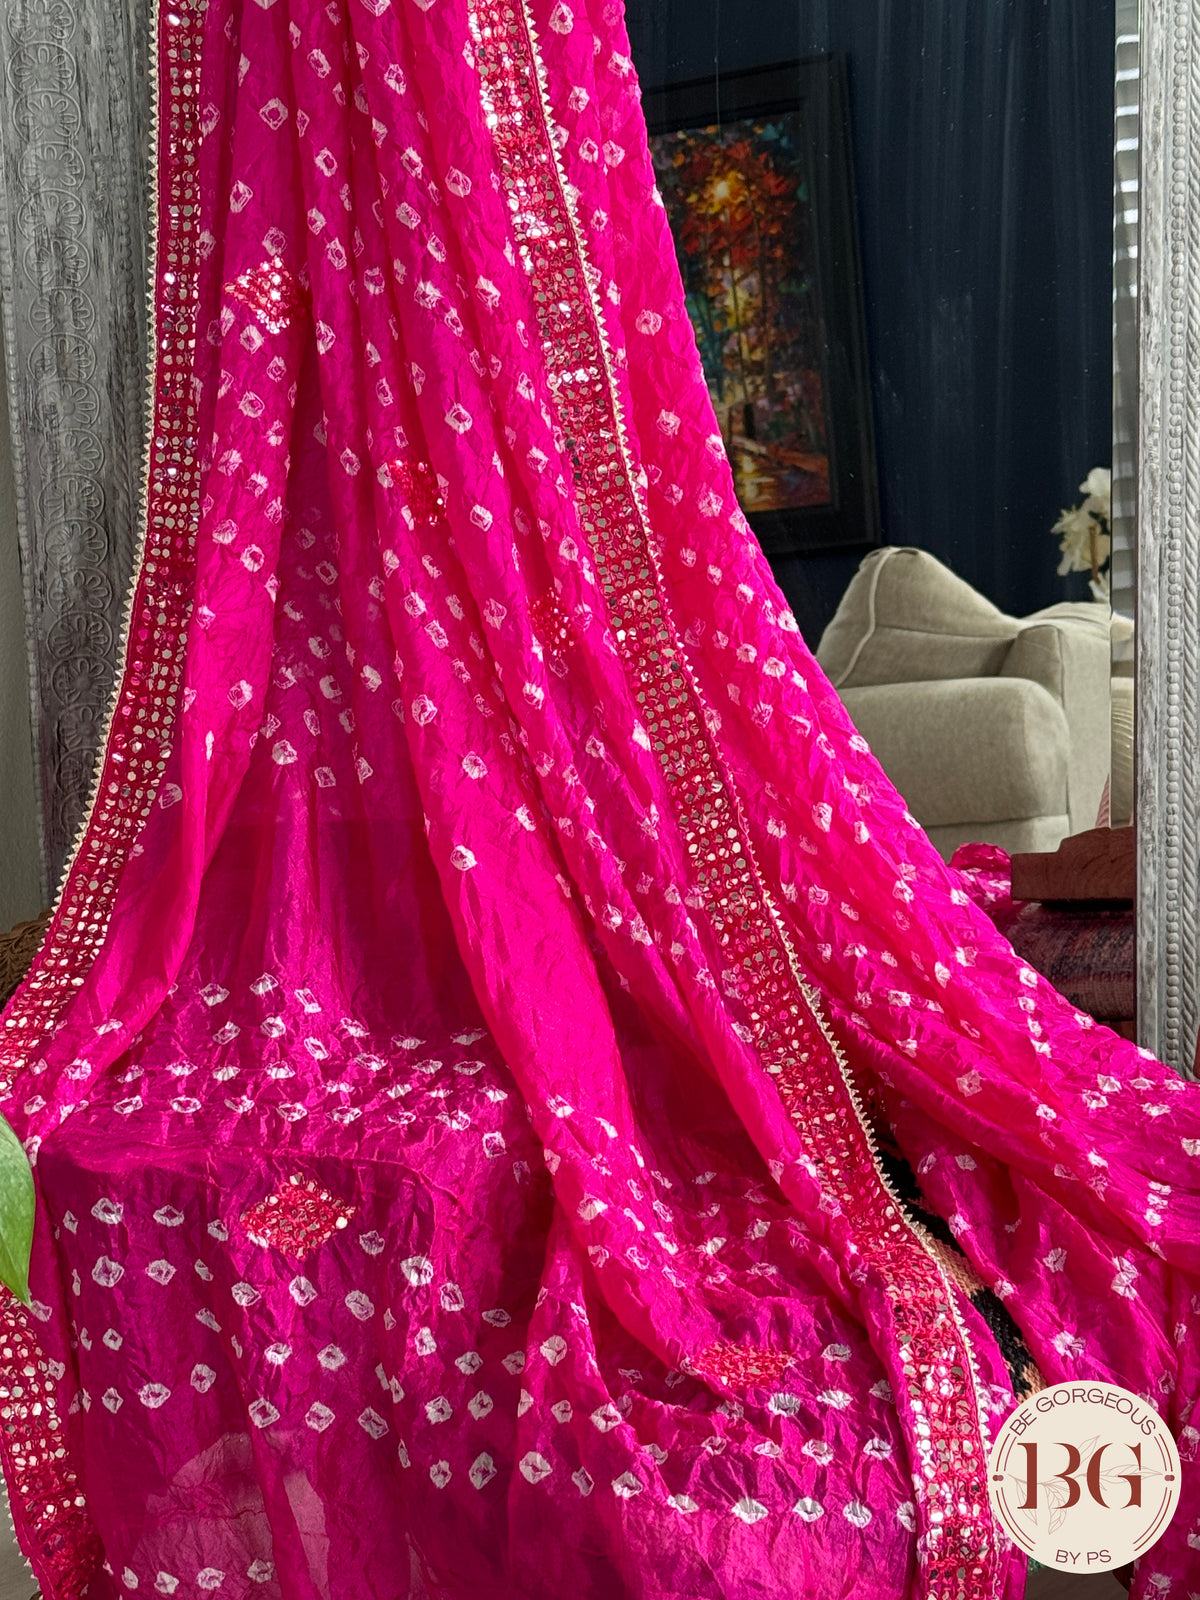 Bandhani on georgette with gota lace - pink